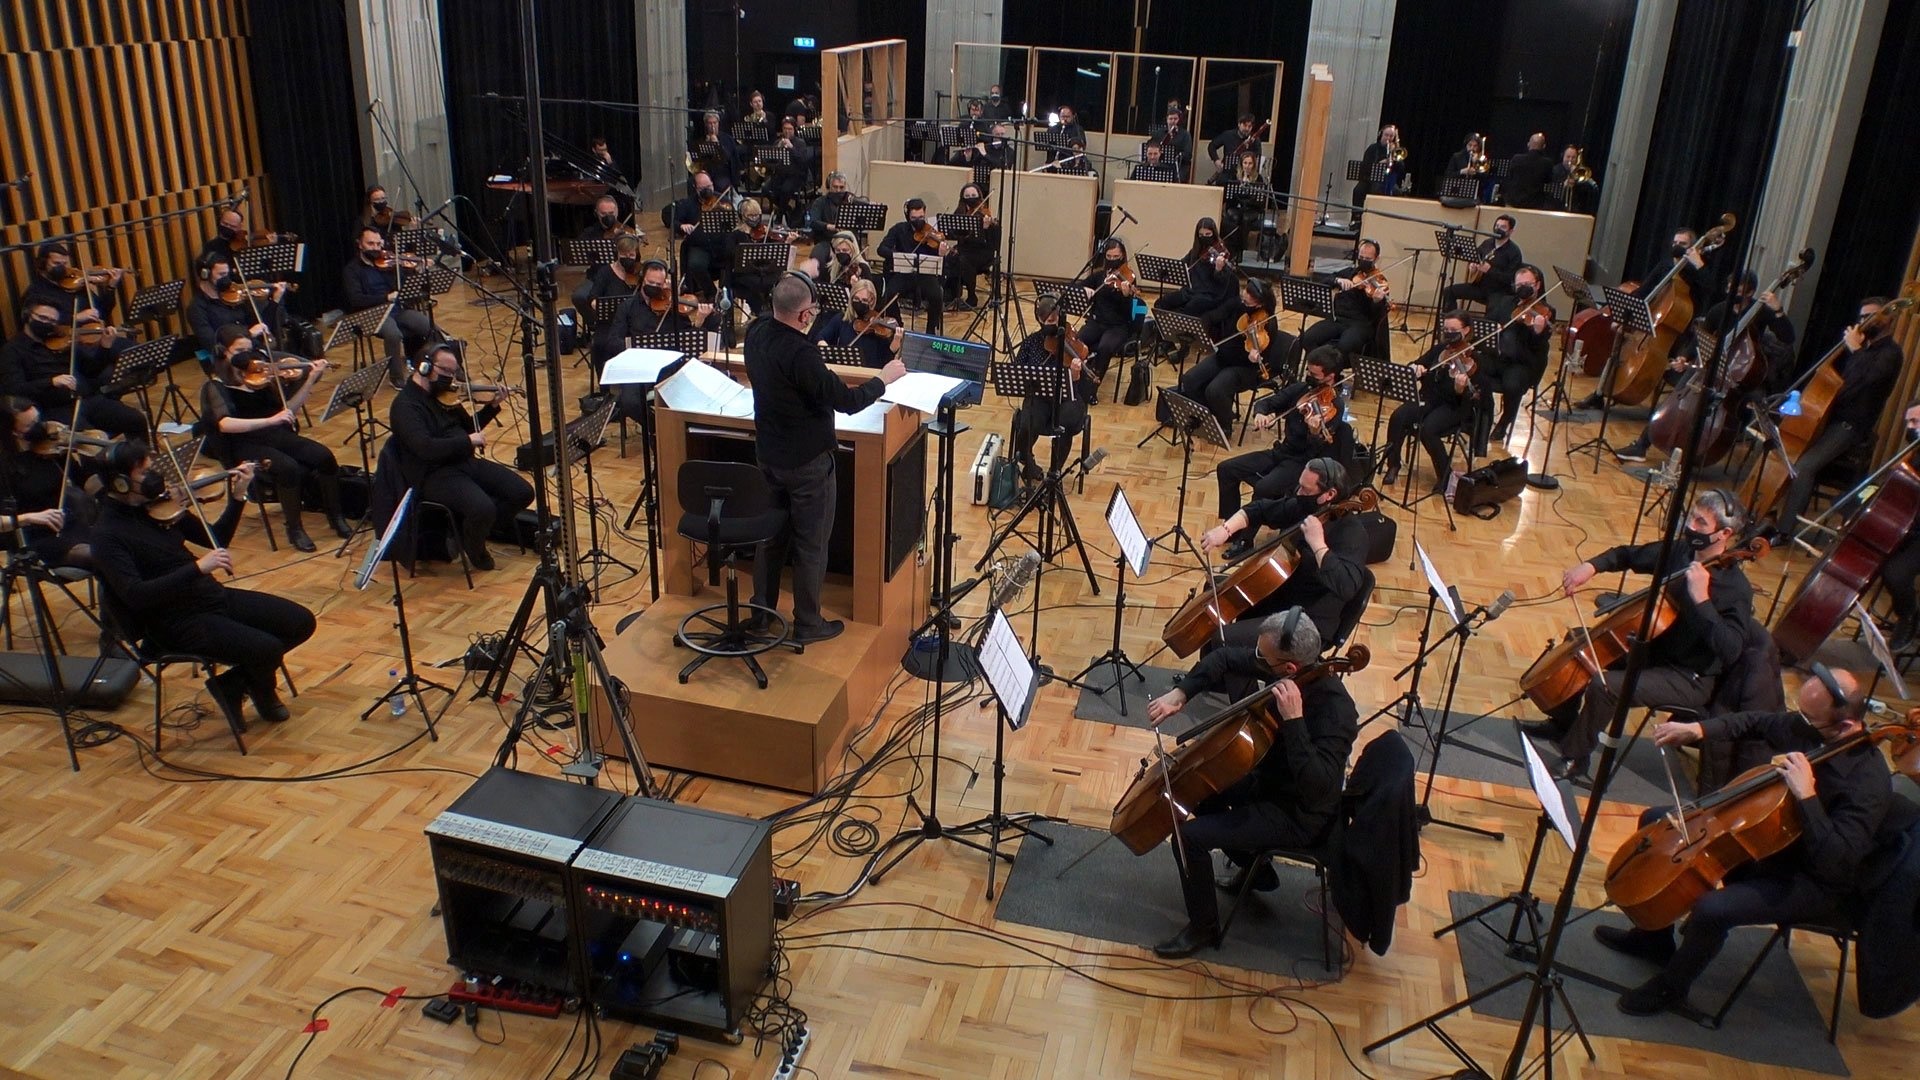 Orchestra: Fames, Orchestral music recording, Music stands, Musical instruments. 1920x1080 Full HD Background.